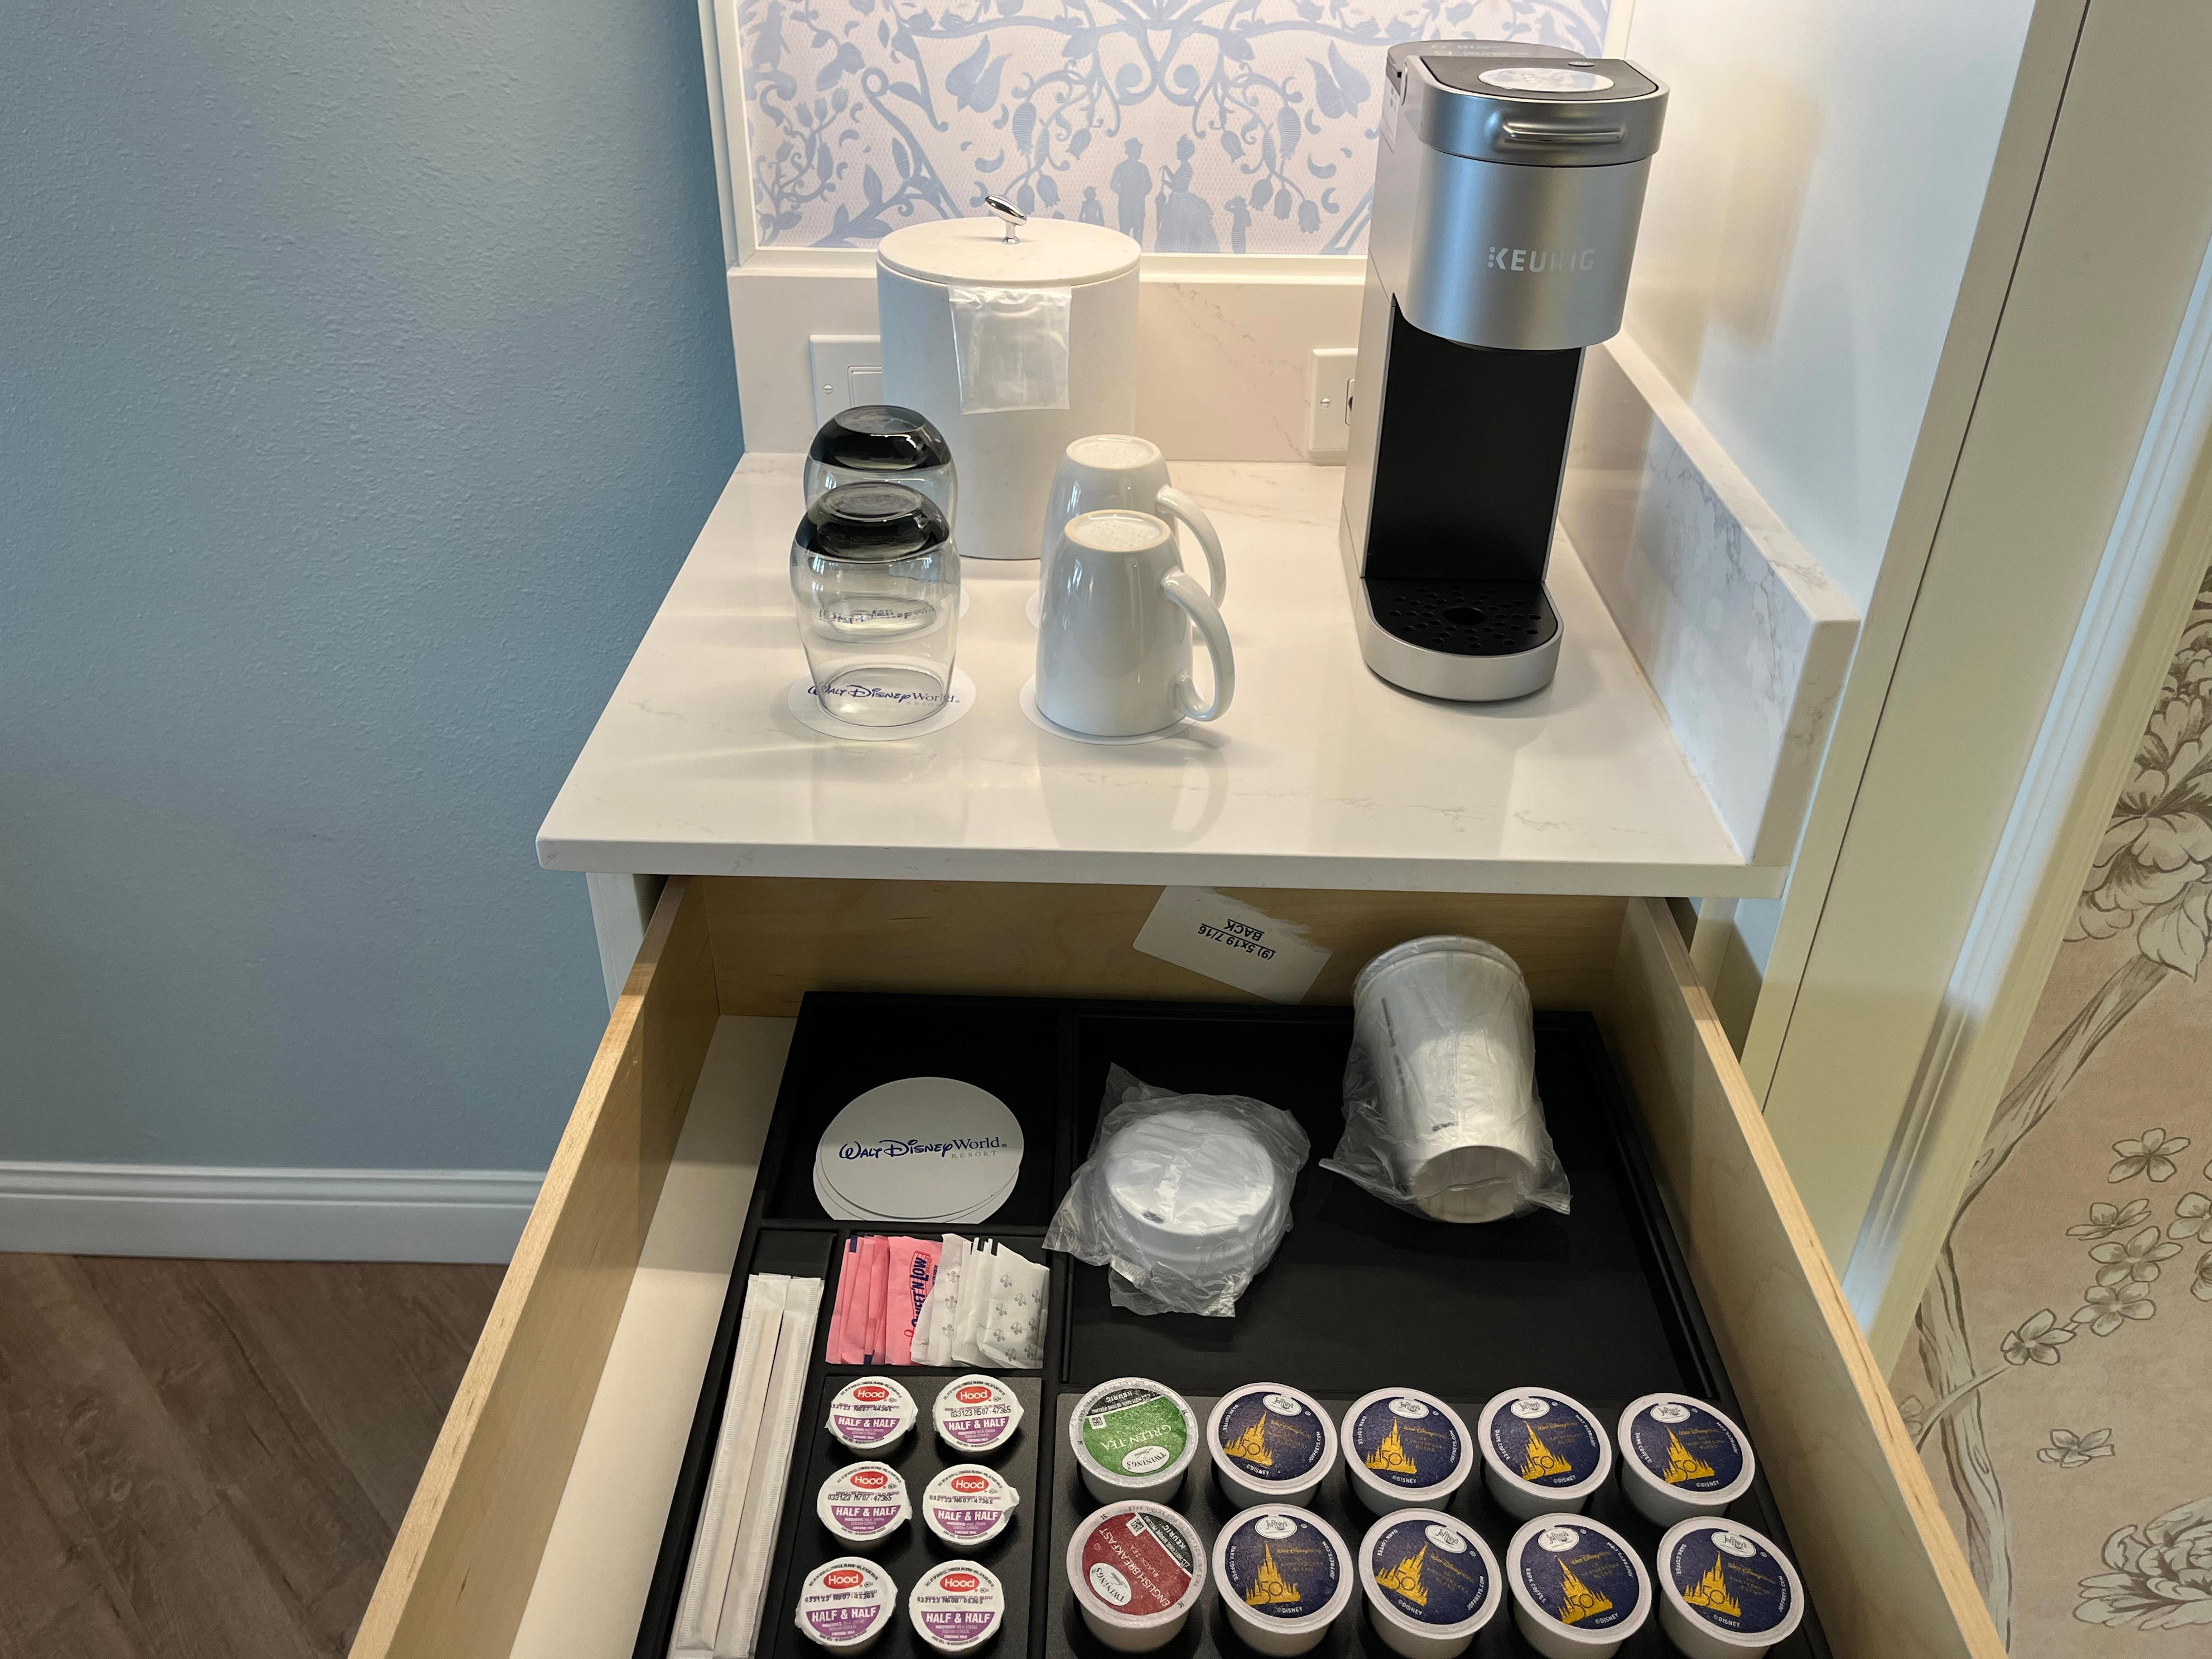 <p>I don't drink coffee, so I didn't take advantage of the in-room coffee bar with a Keurig machine. </p><p>But if I knew about it ahead of time, I would've brought some <a href="https://www.businessinsider.com/the-best-store-bought-hot-cocoa-review">hot-cocoa K-Cups</a>.</p>